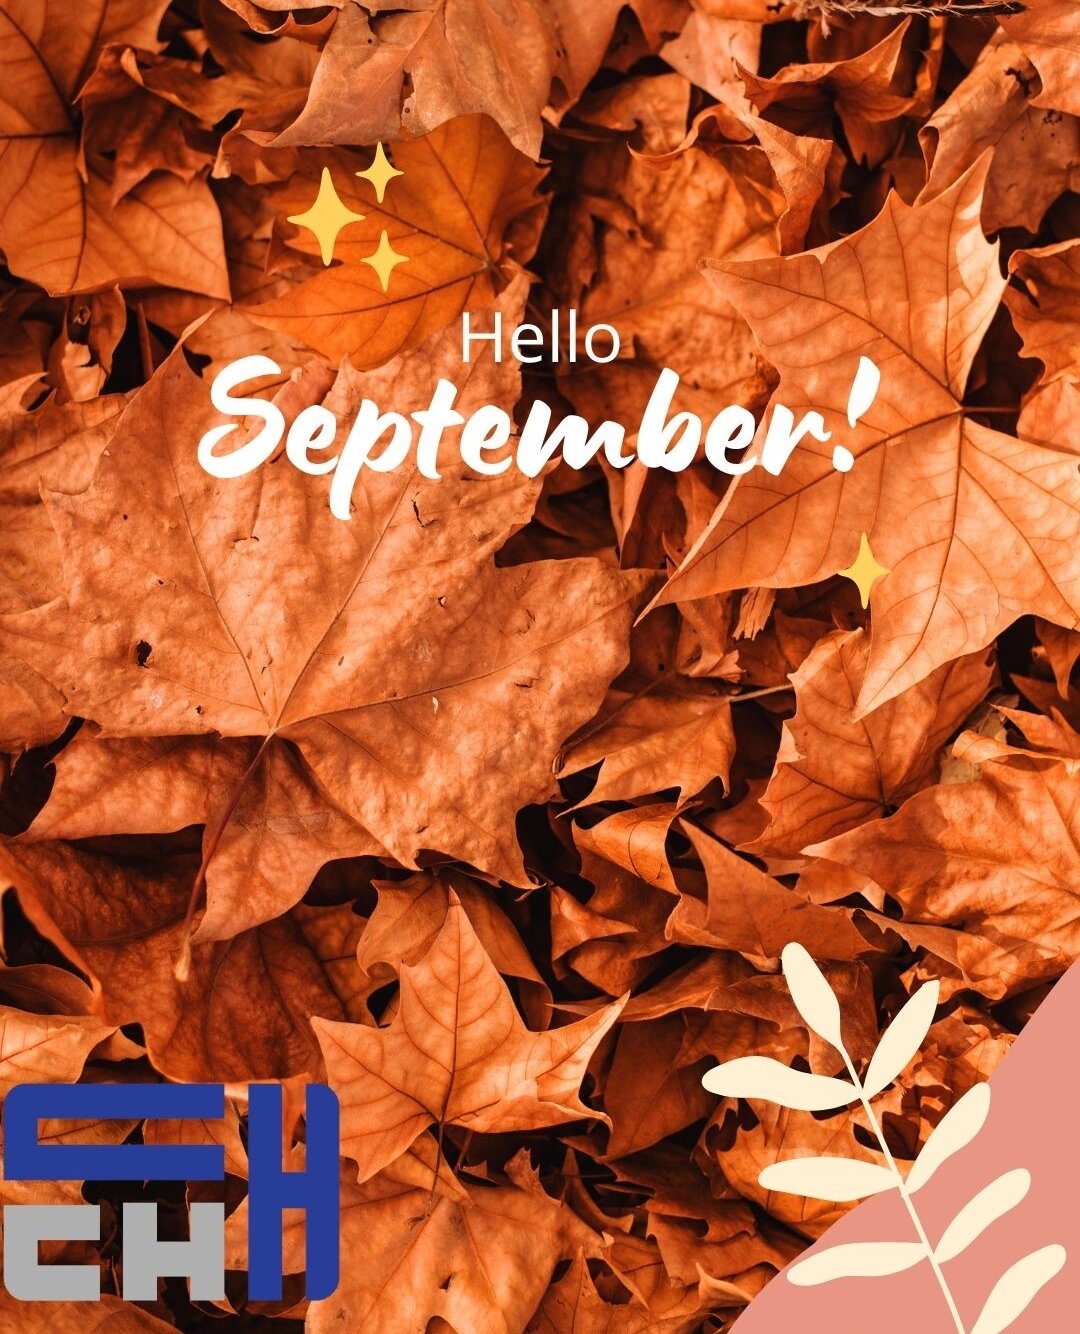 Happy New Month!!!🍂⁠
⁠
It's a new beginning, make the most of it. Set goals, work hard and achieve them. Keep Working toward a better future.⁠
⁠
🍁🍁🍁🍁🍁🍁🍁🍁🍁🍁🍁🍁🍁🍁🍁🍁🍁🍁🍁🍁🍁⁠
⁠
Follow us here and on our website www.chcareerhub.org for 